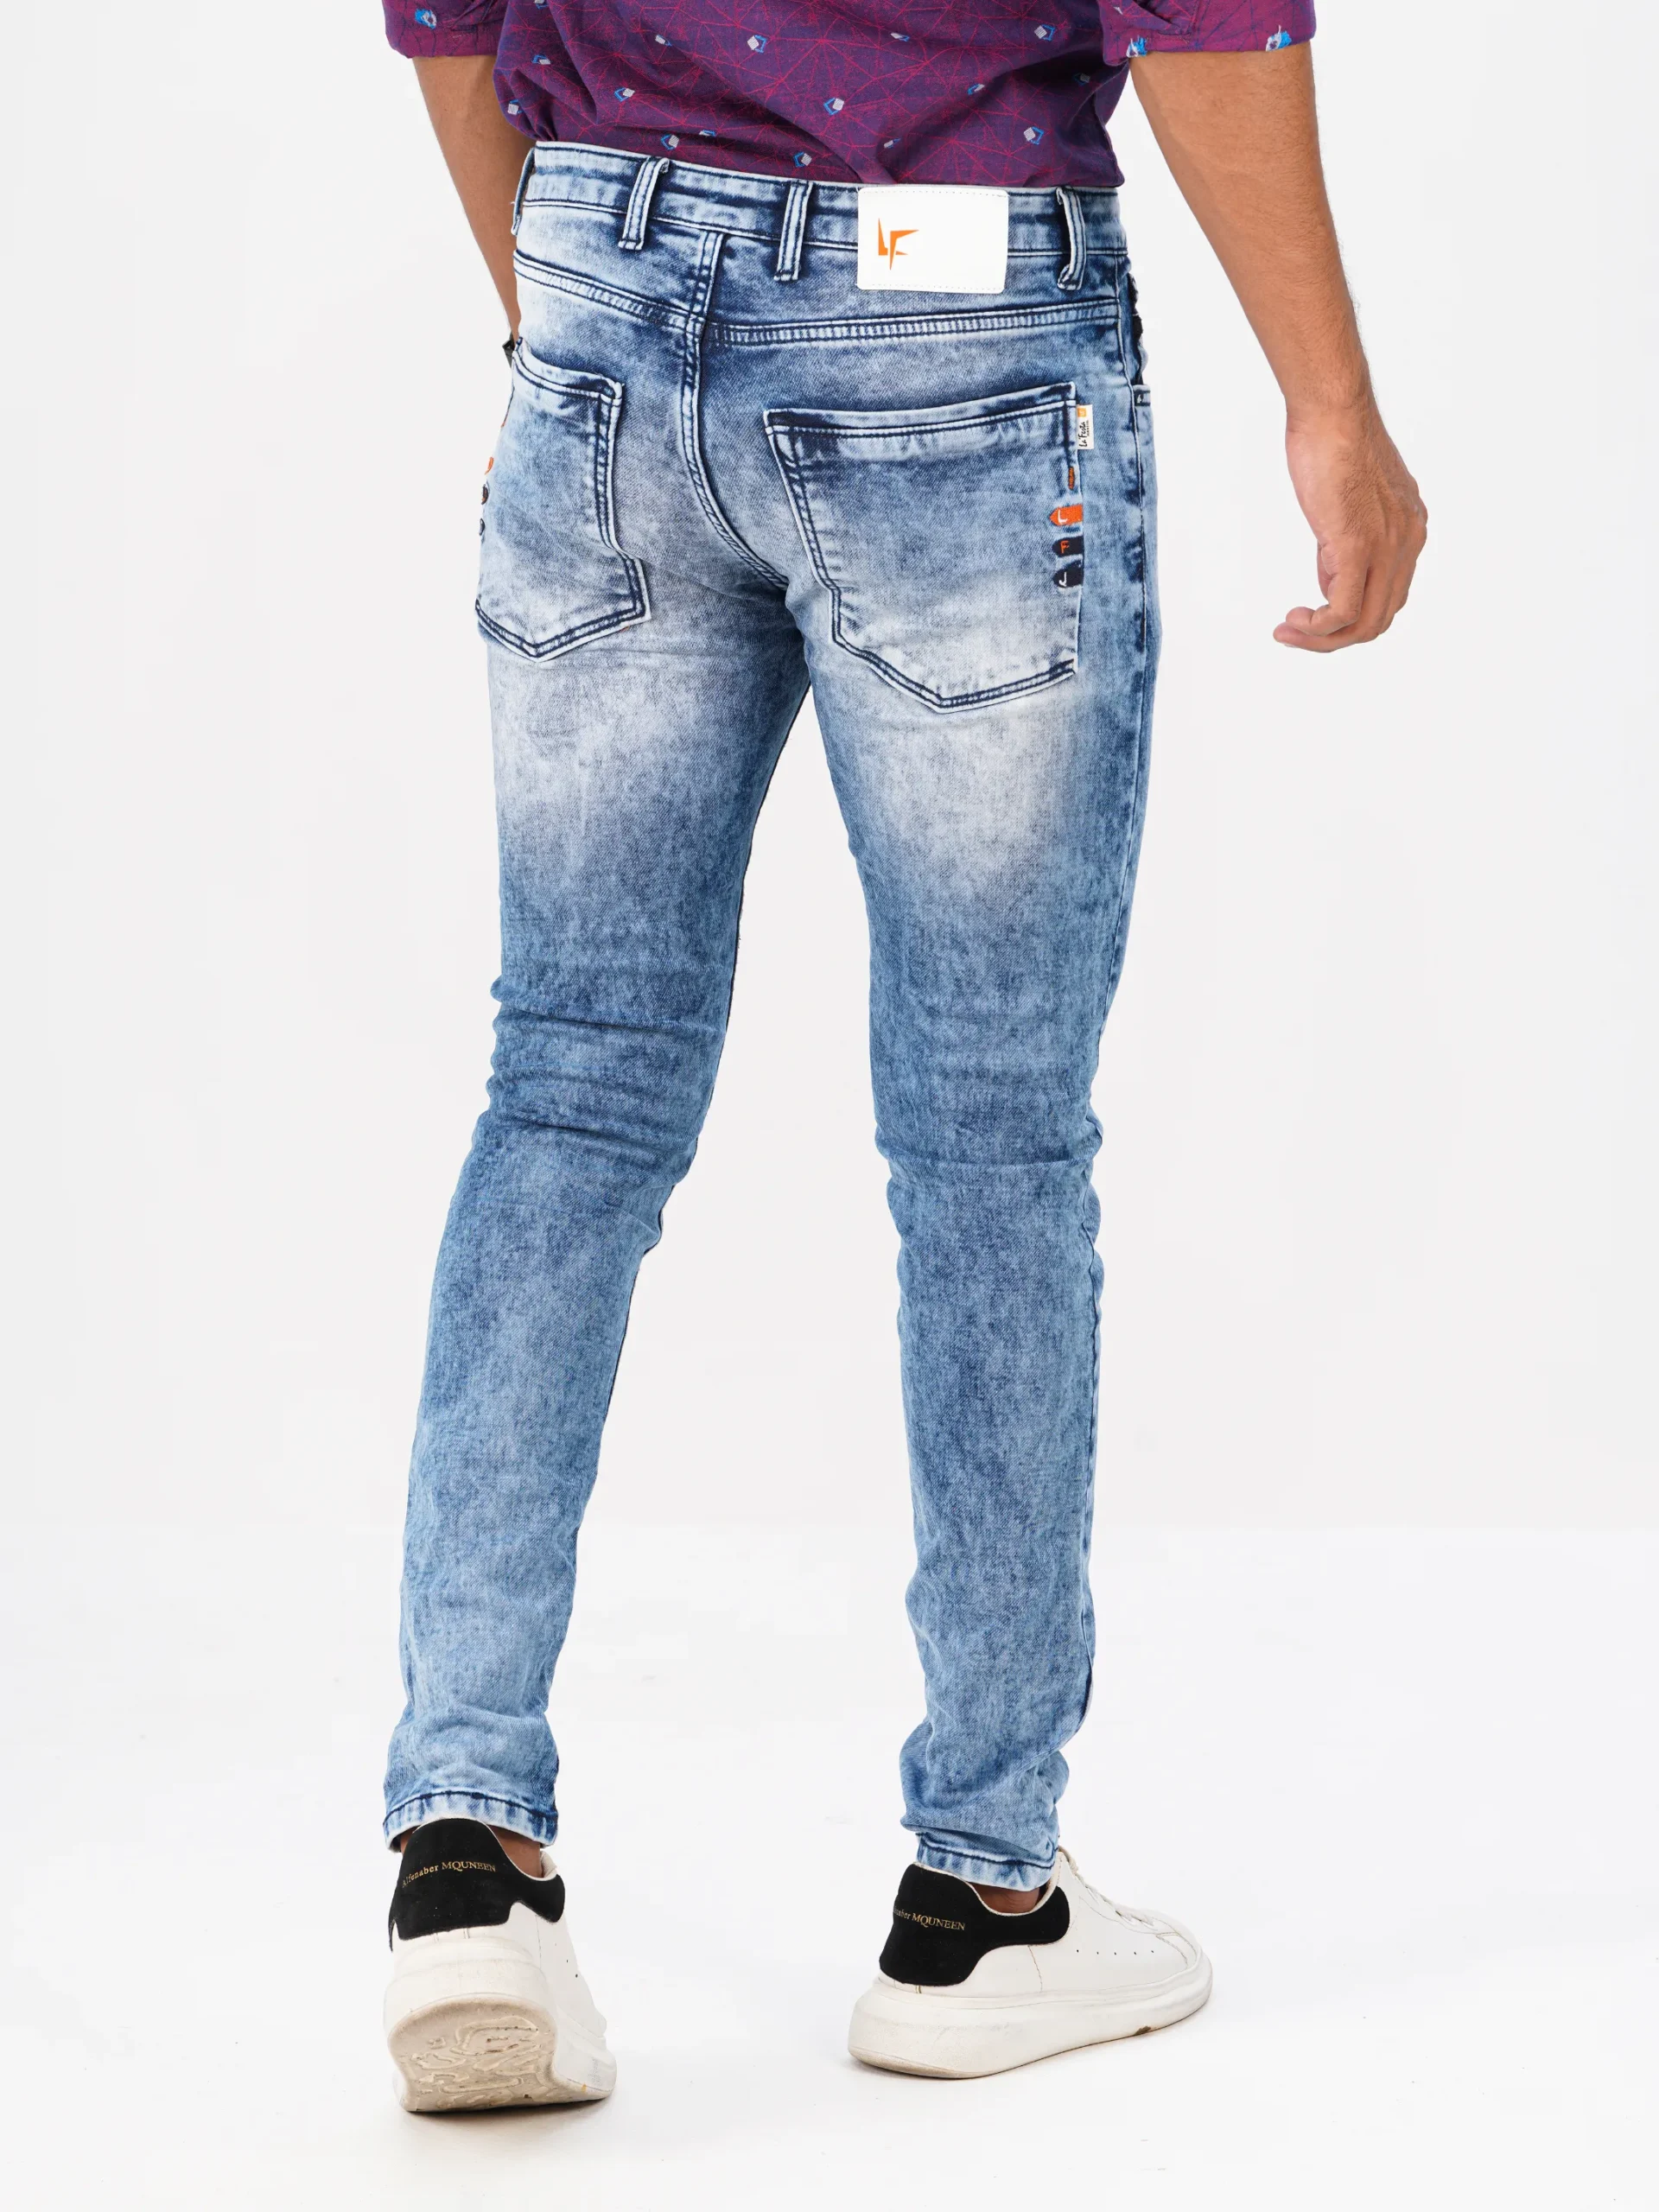 Foreign Premium Quality Jeans Pant